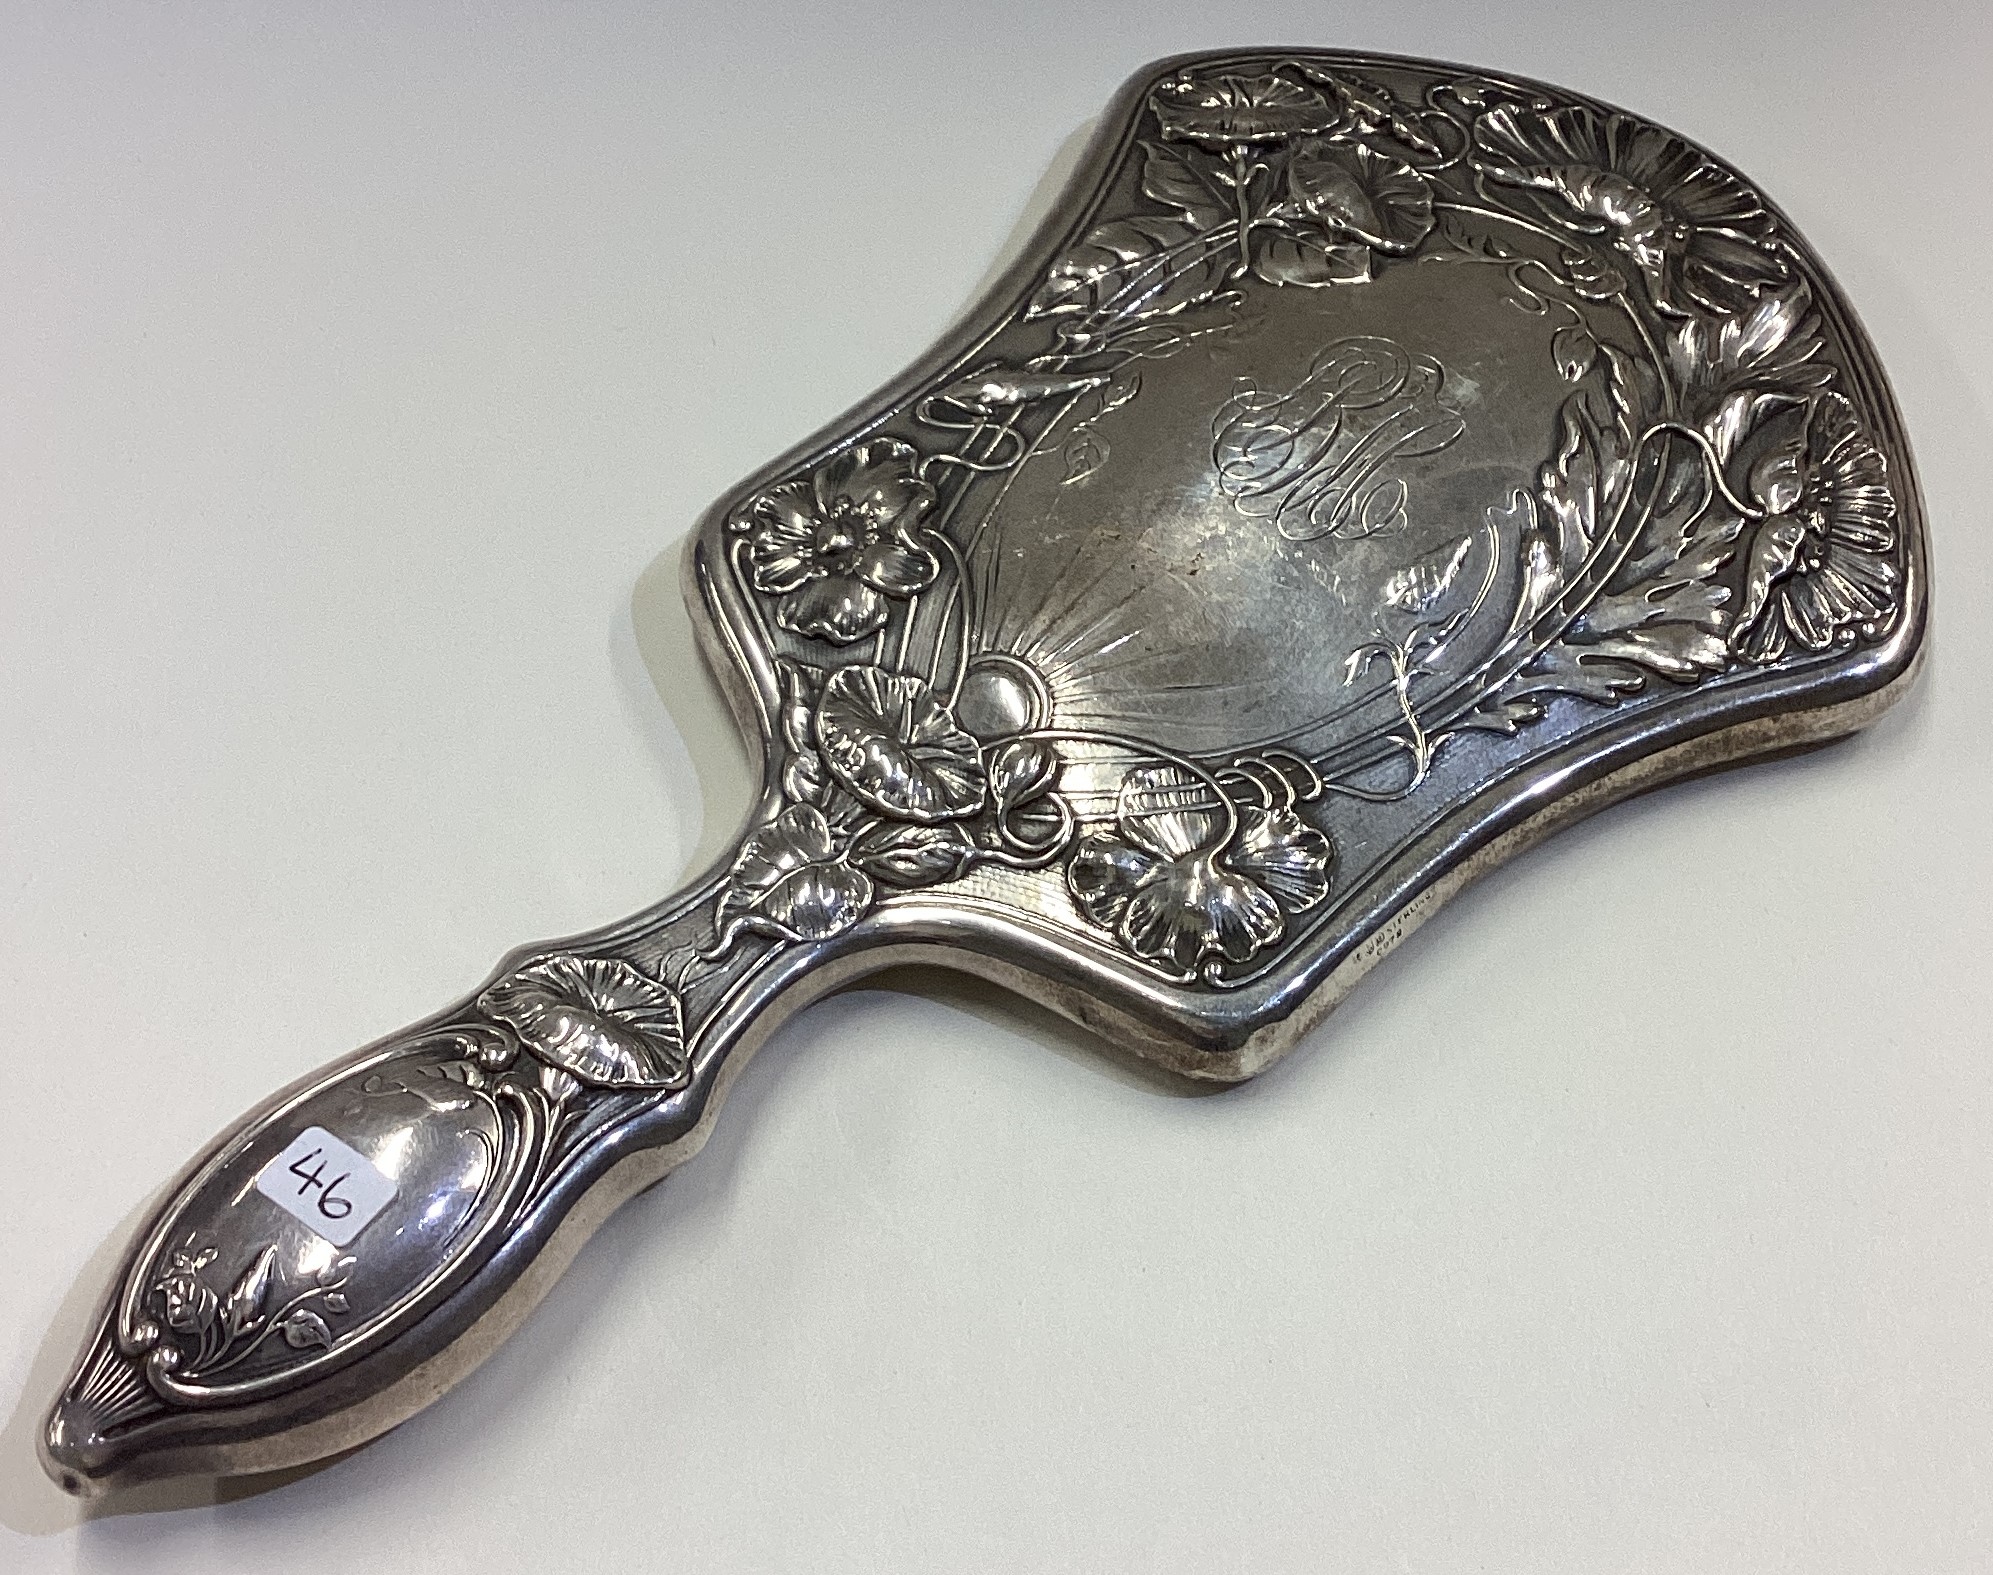 A fine and heavy Gorham silver mirror heavily chased with flowers.